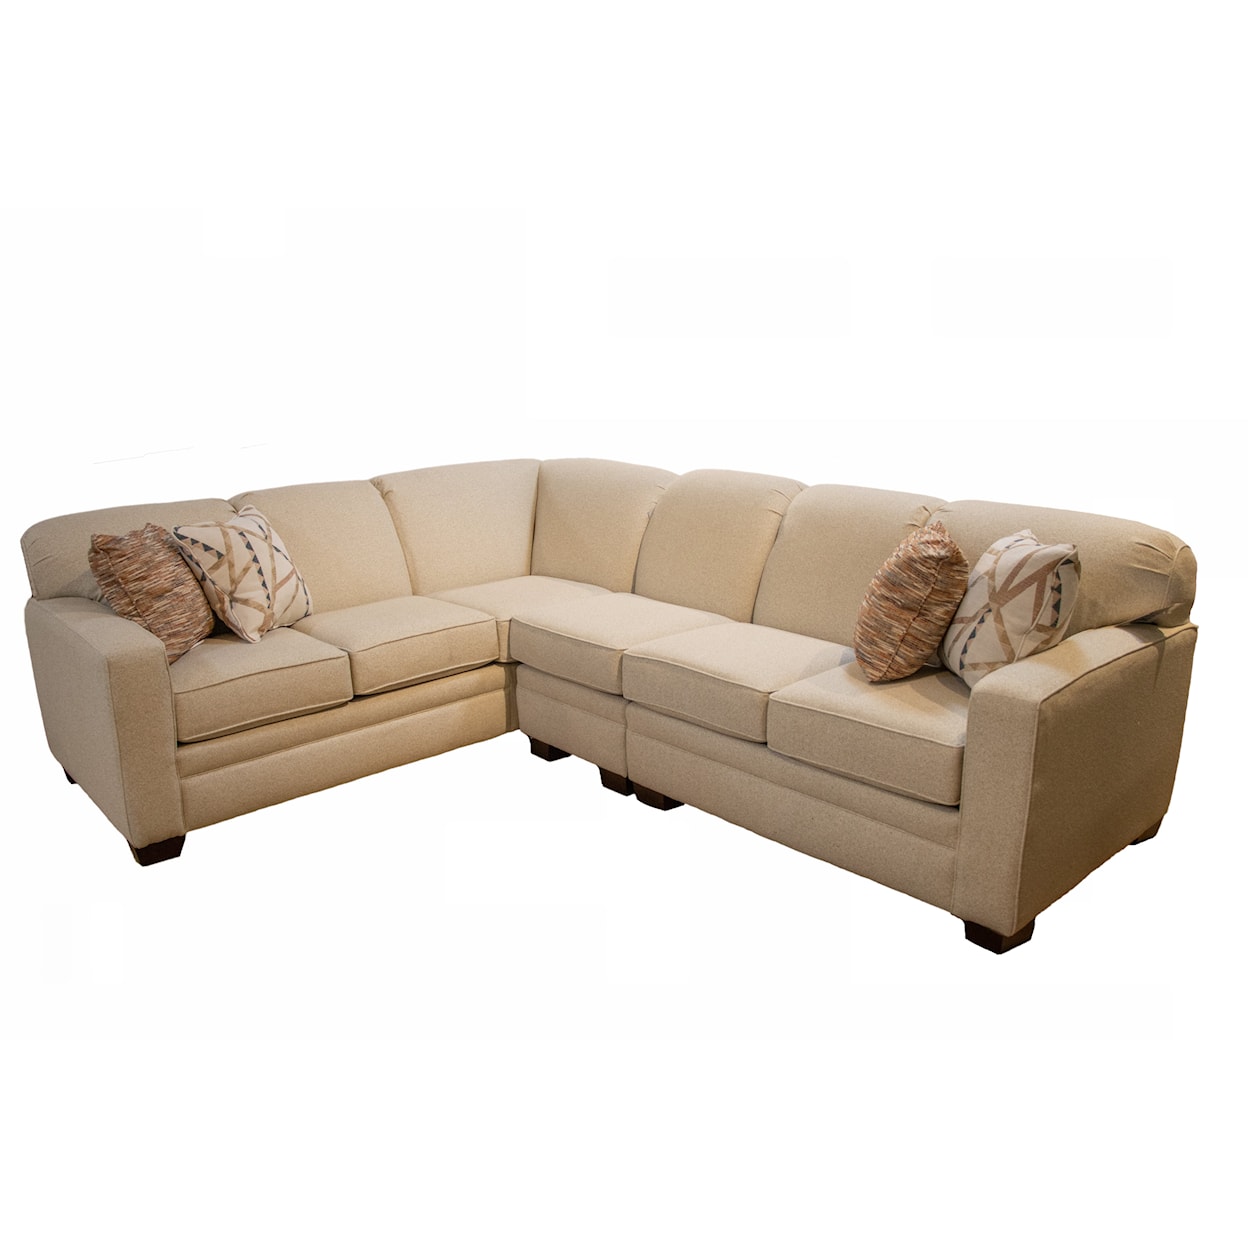 England 6000 Series 3 Piece Transitional Sectional